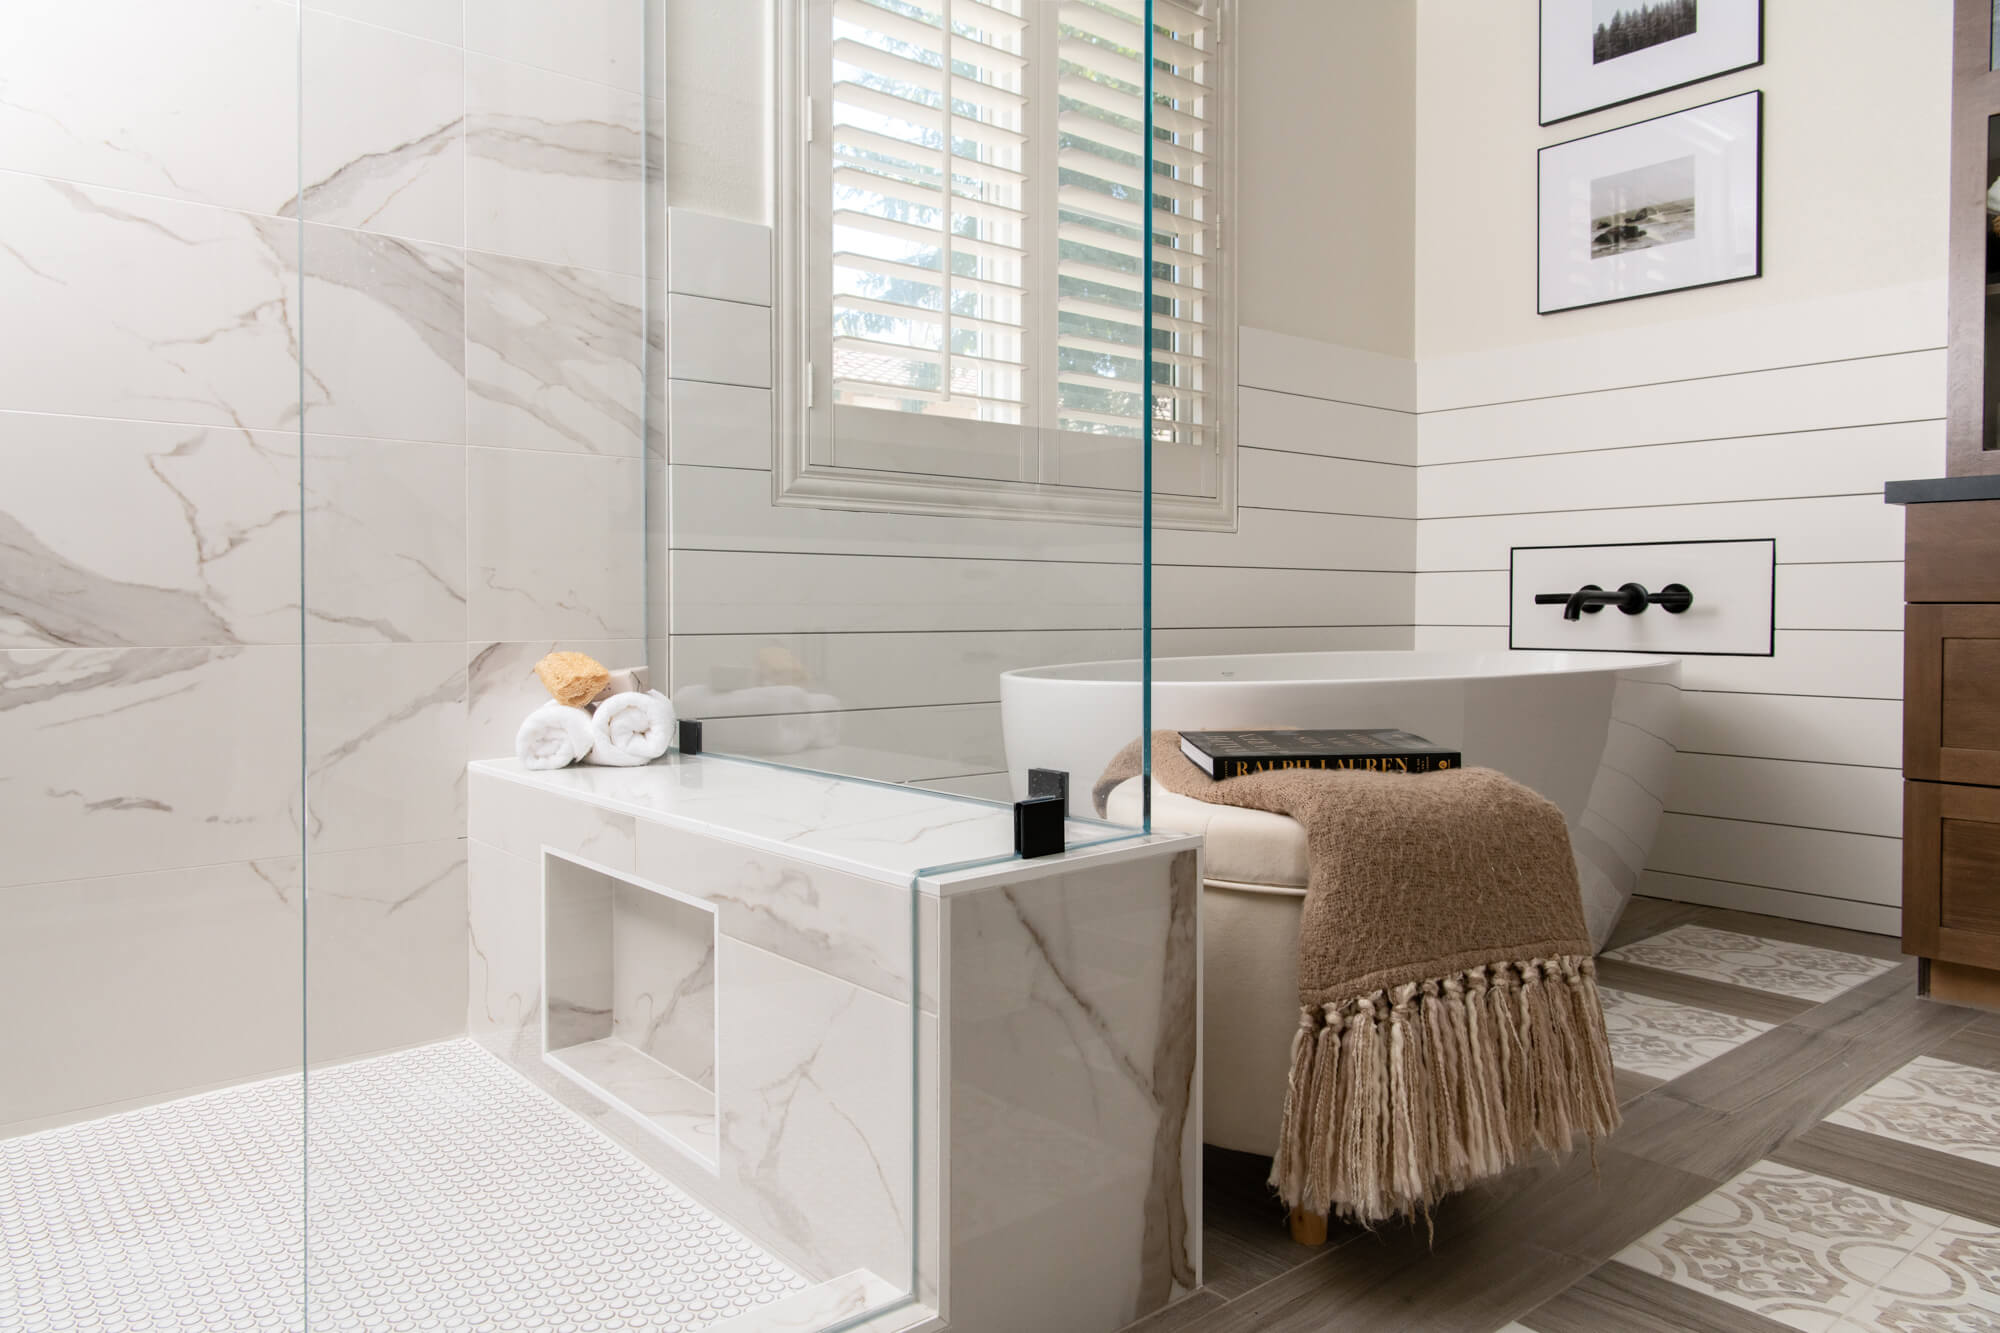 Shiplap lined walls by freestanding tub - trading a bathtub for a shower